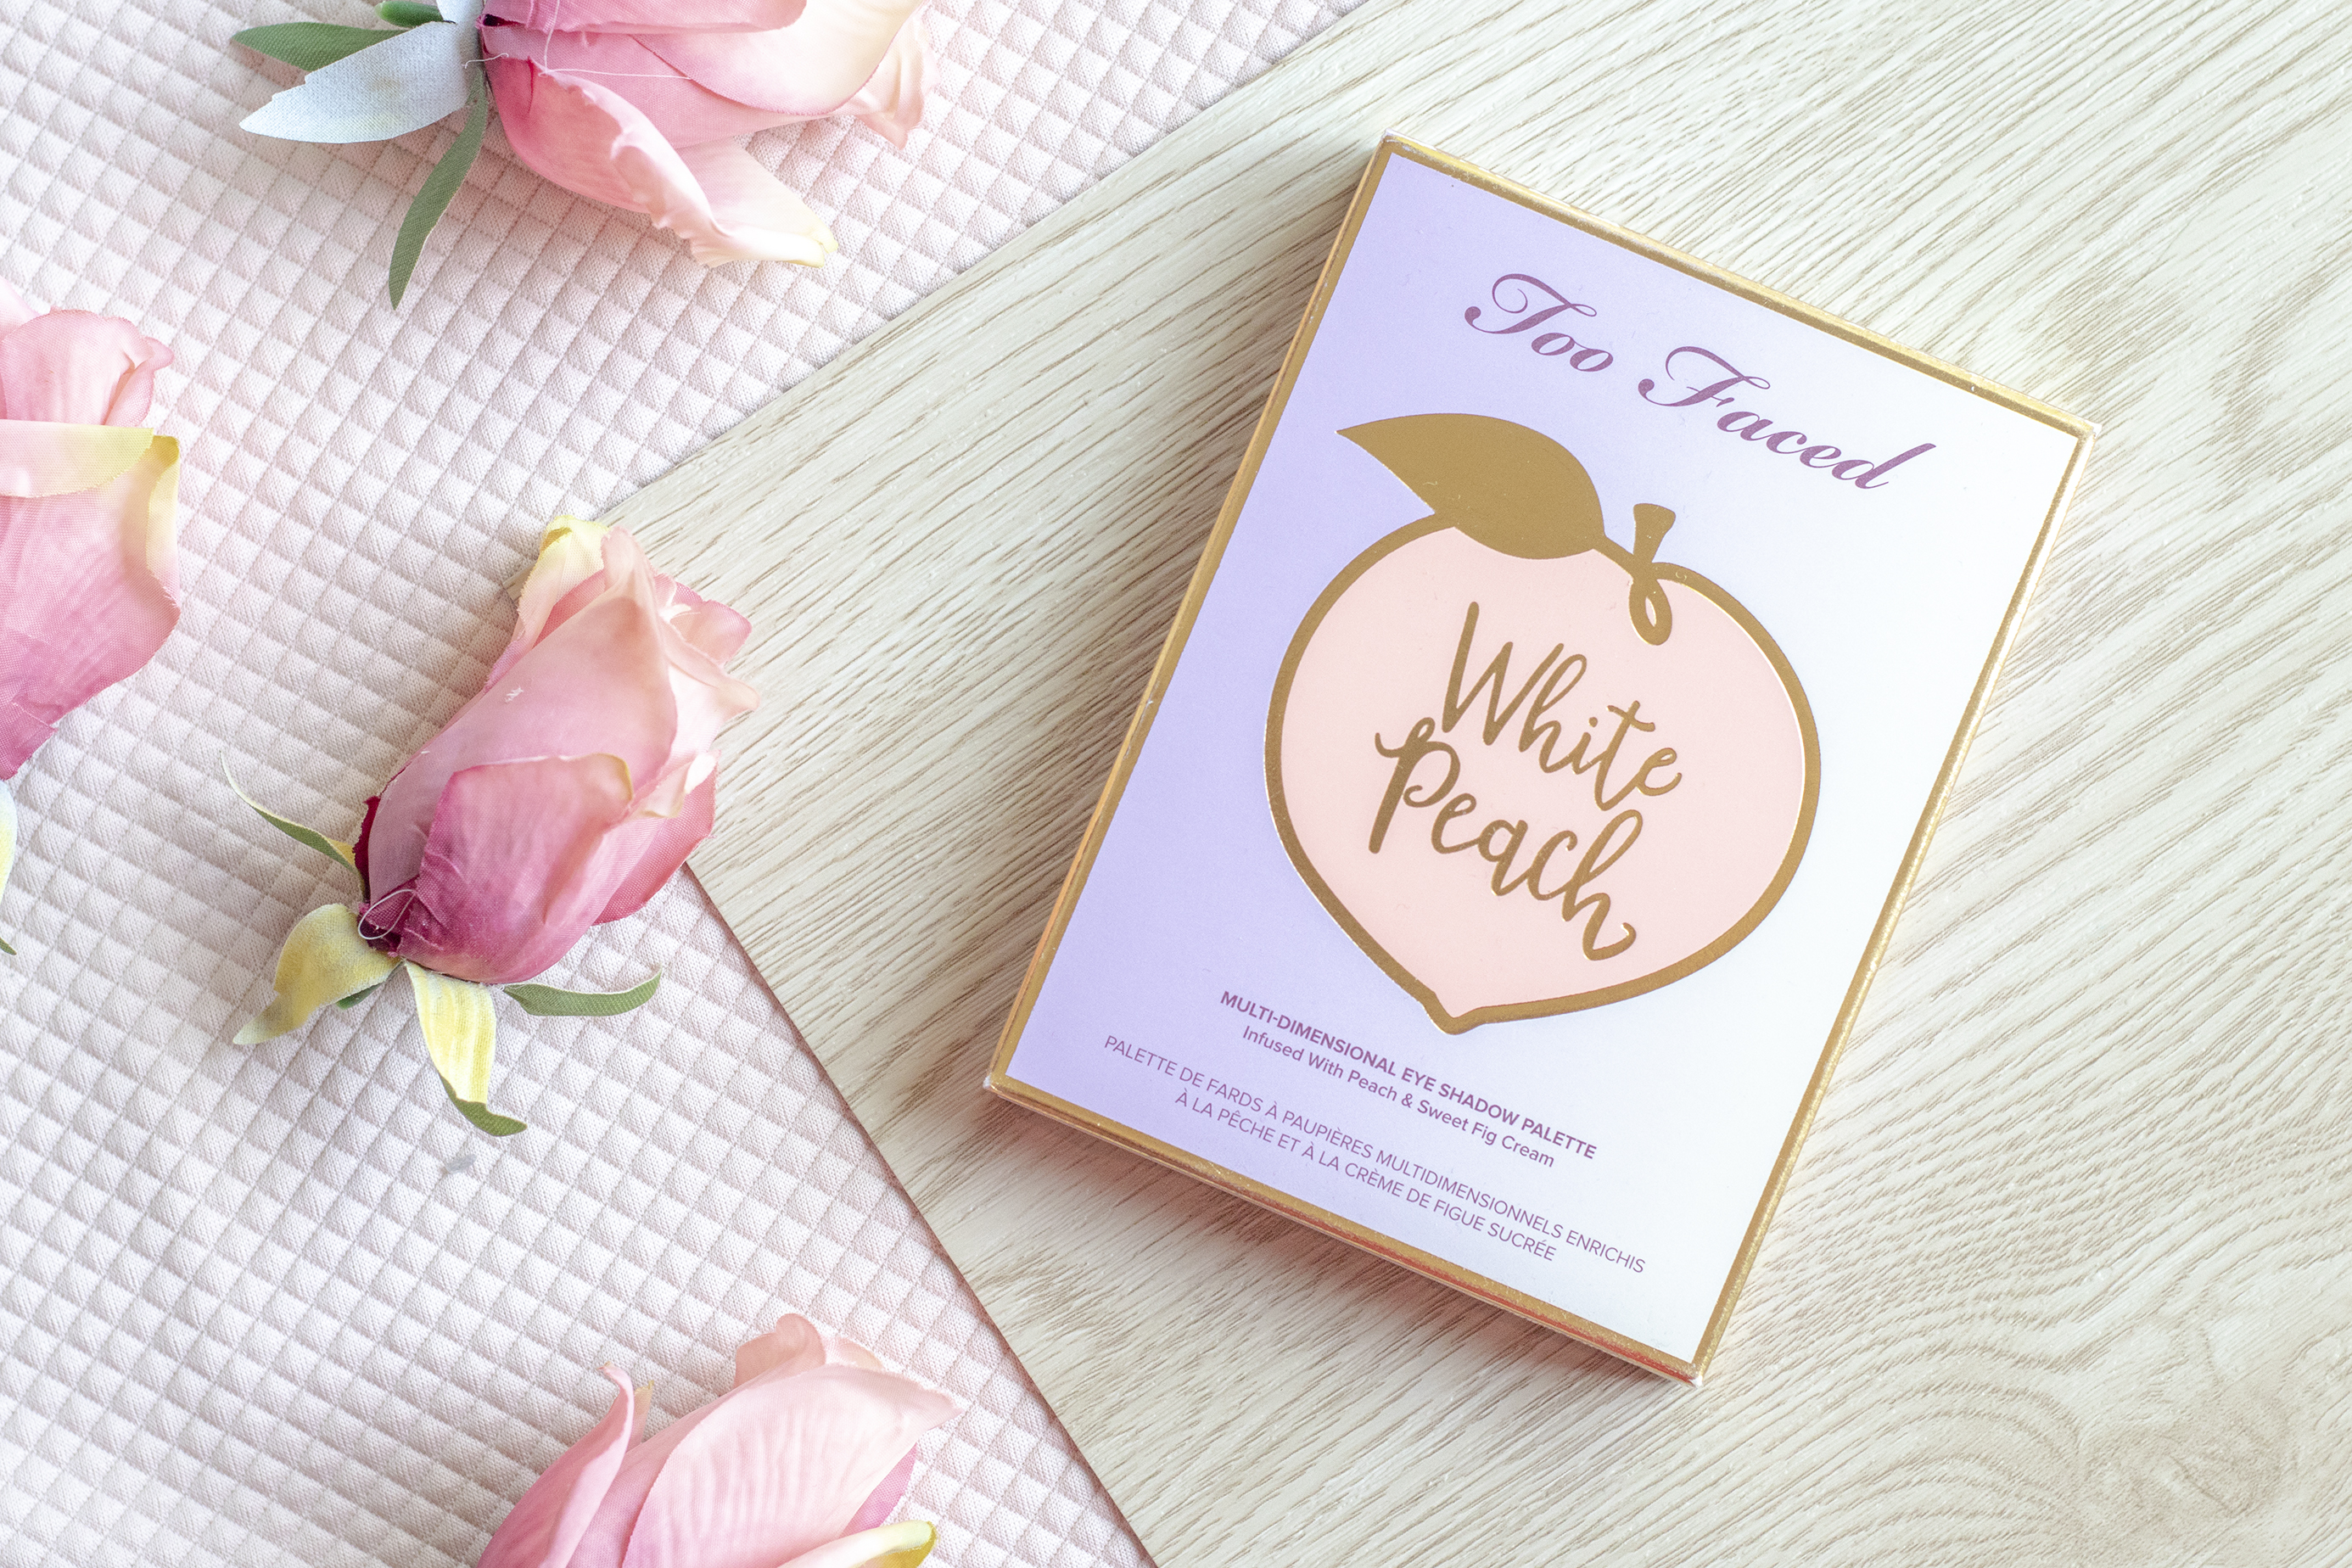 white peach too faced oogschaduw palette review